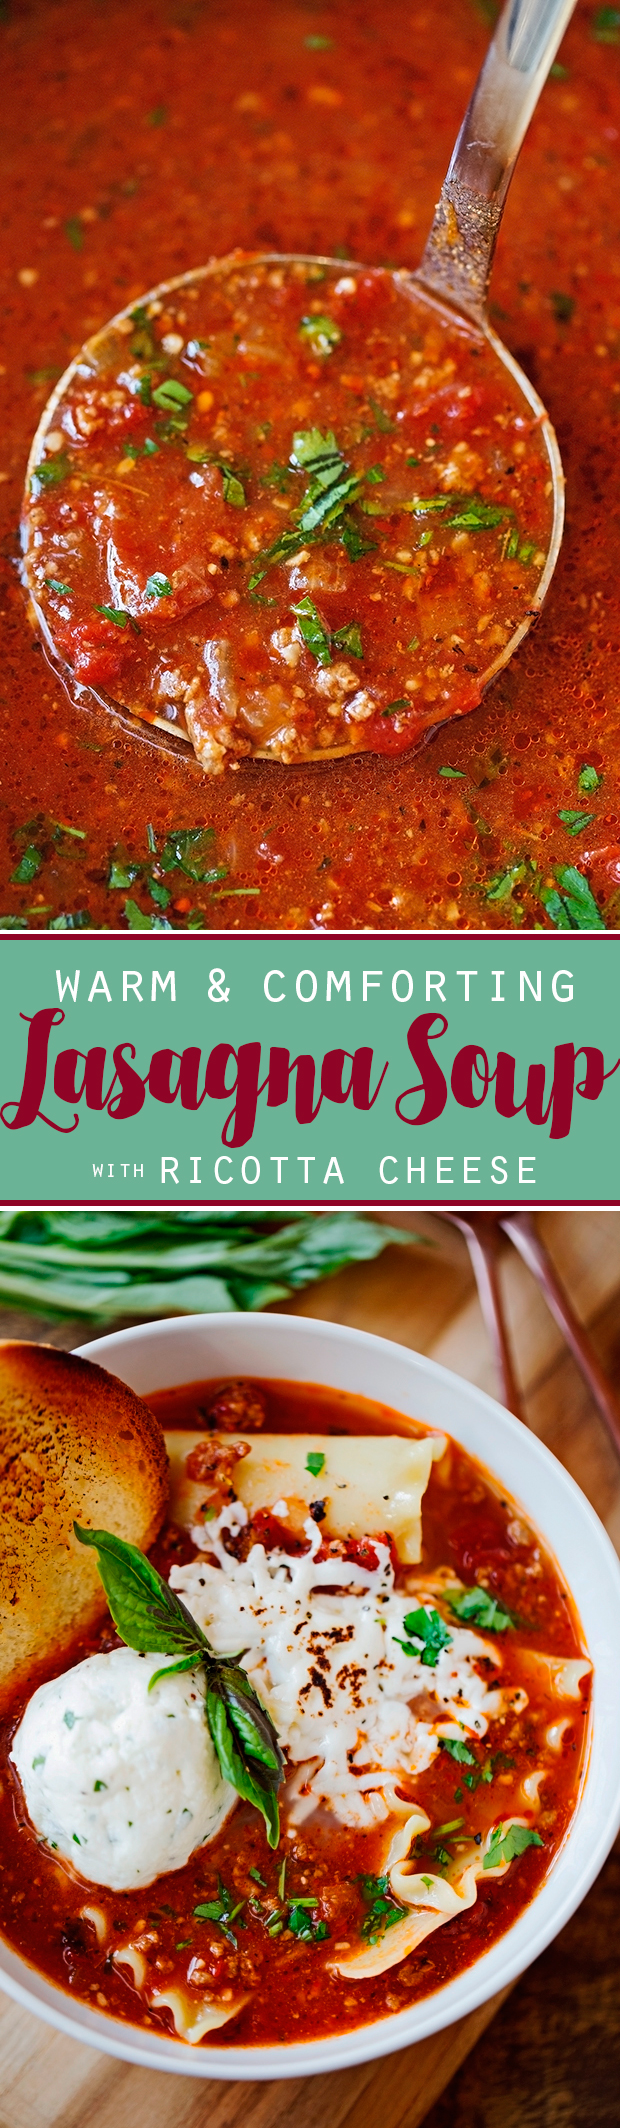 Warm & Comforting Lasagna Soup - all your favorite layers of lasagna stuffed into an easy to make soup recipe! #lasagna #lasagnasoup #soup | Littlespicejar.com